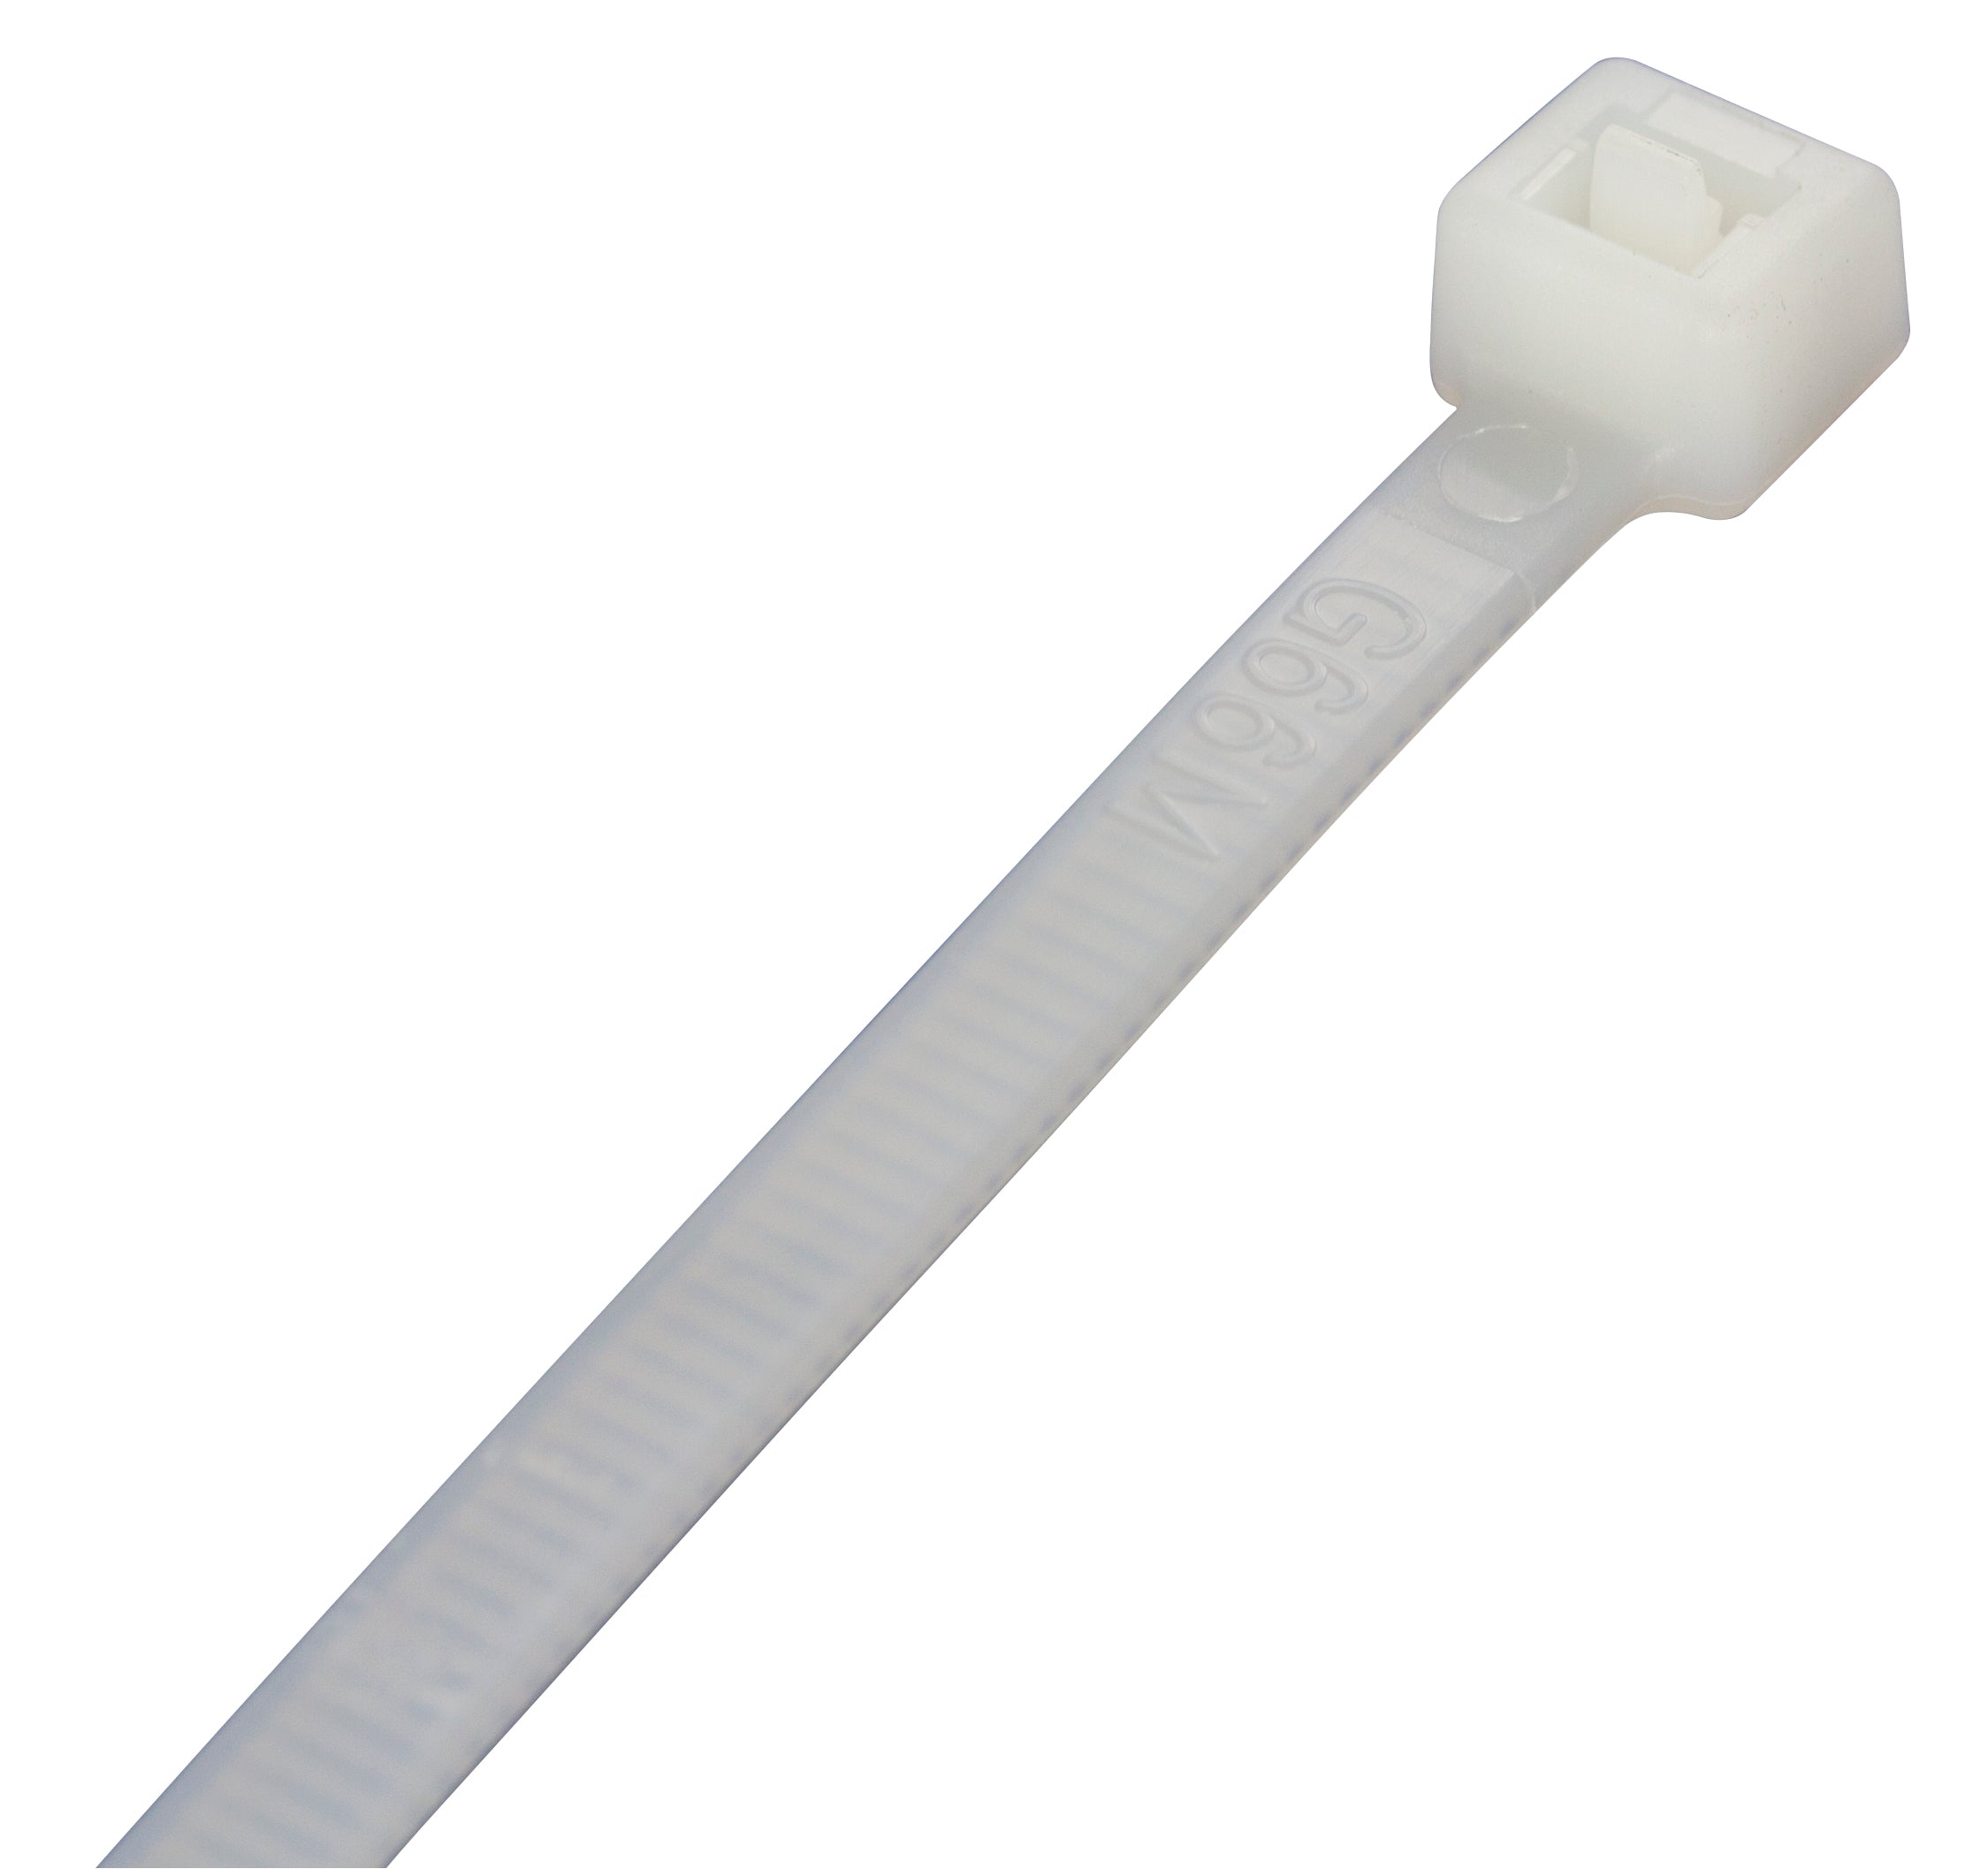 Premium Natural Cable Ties 160mm x 4.8mm - Pack of 100